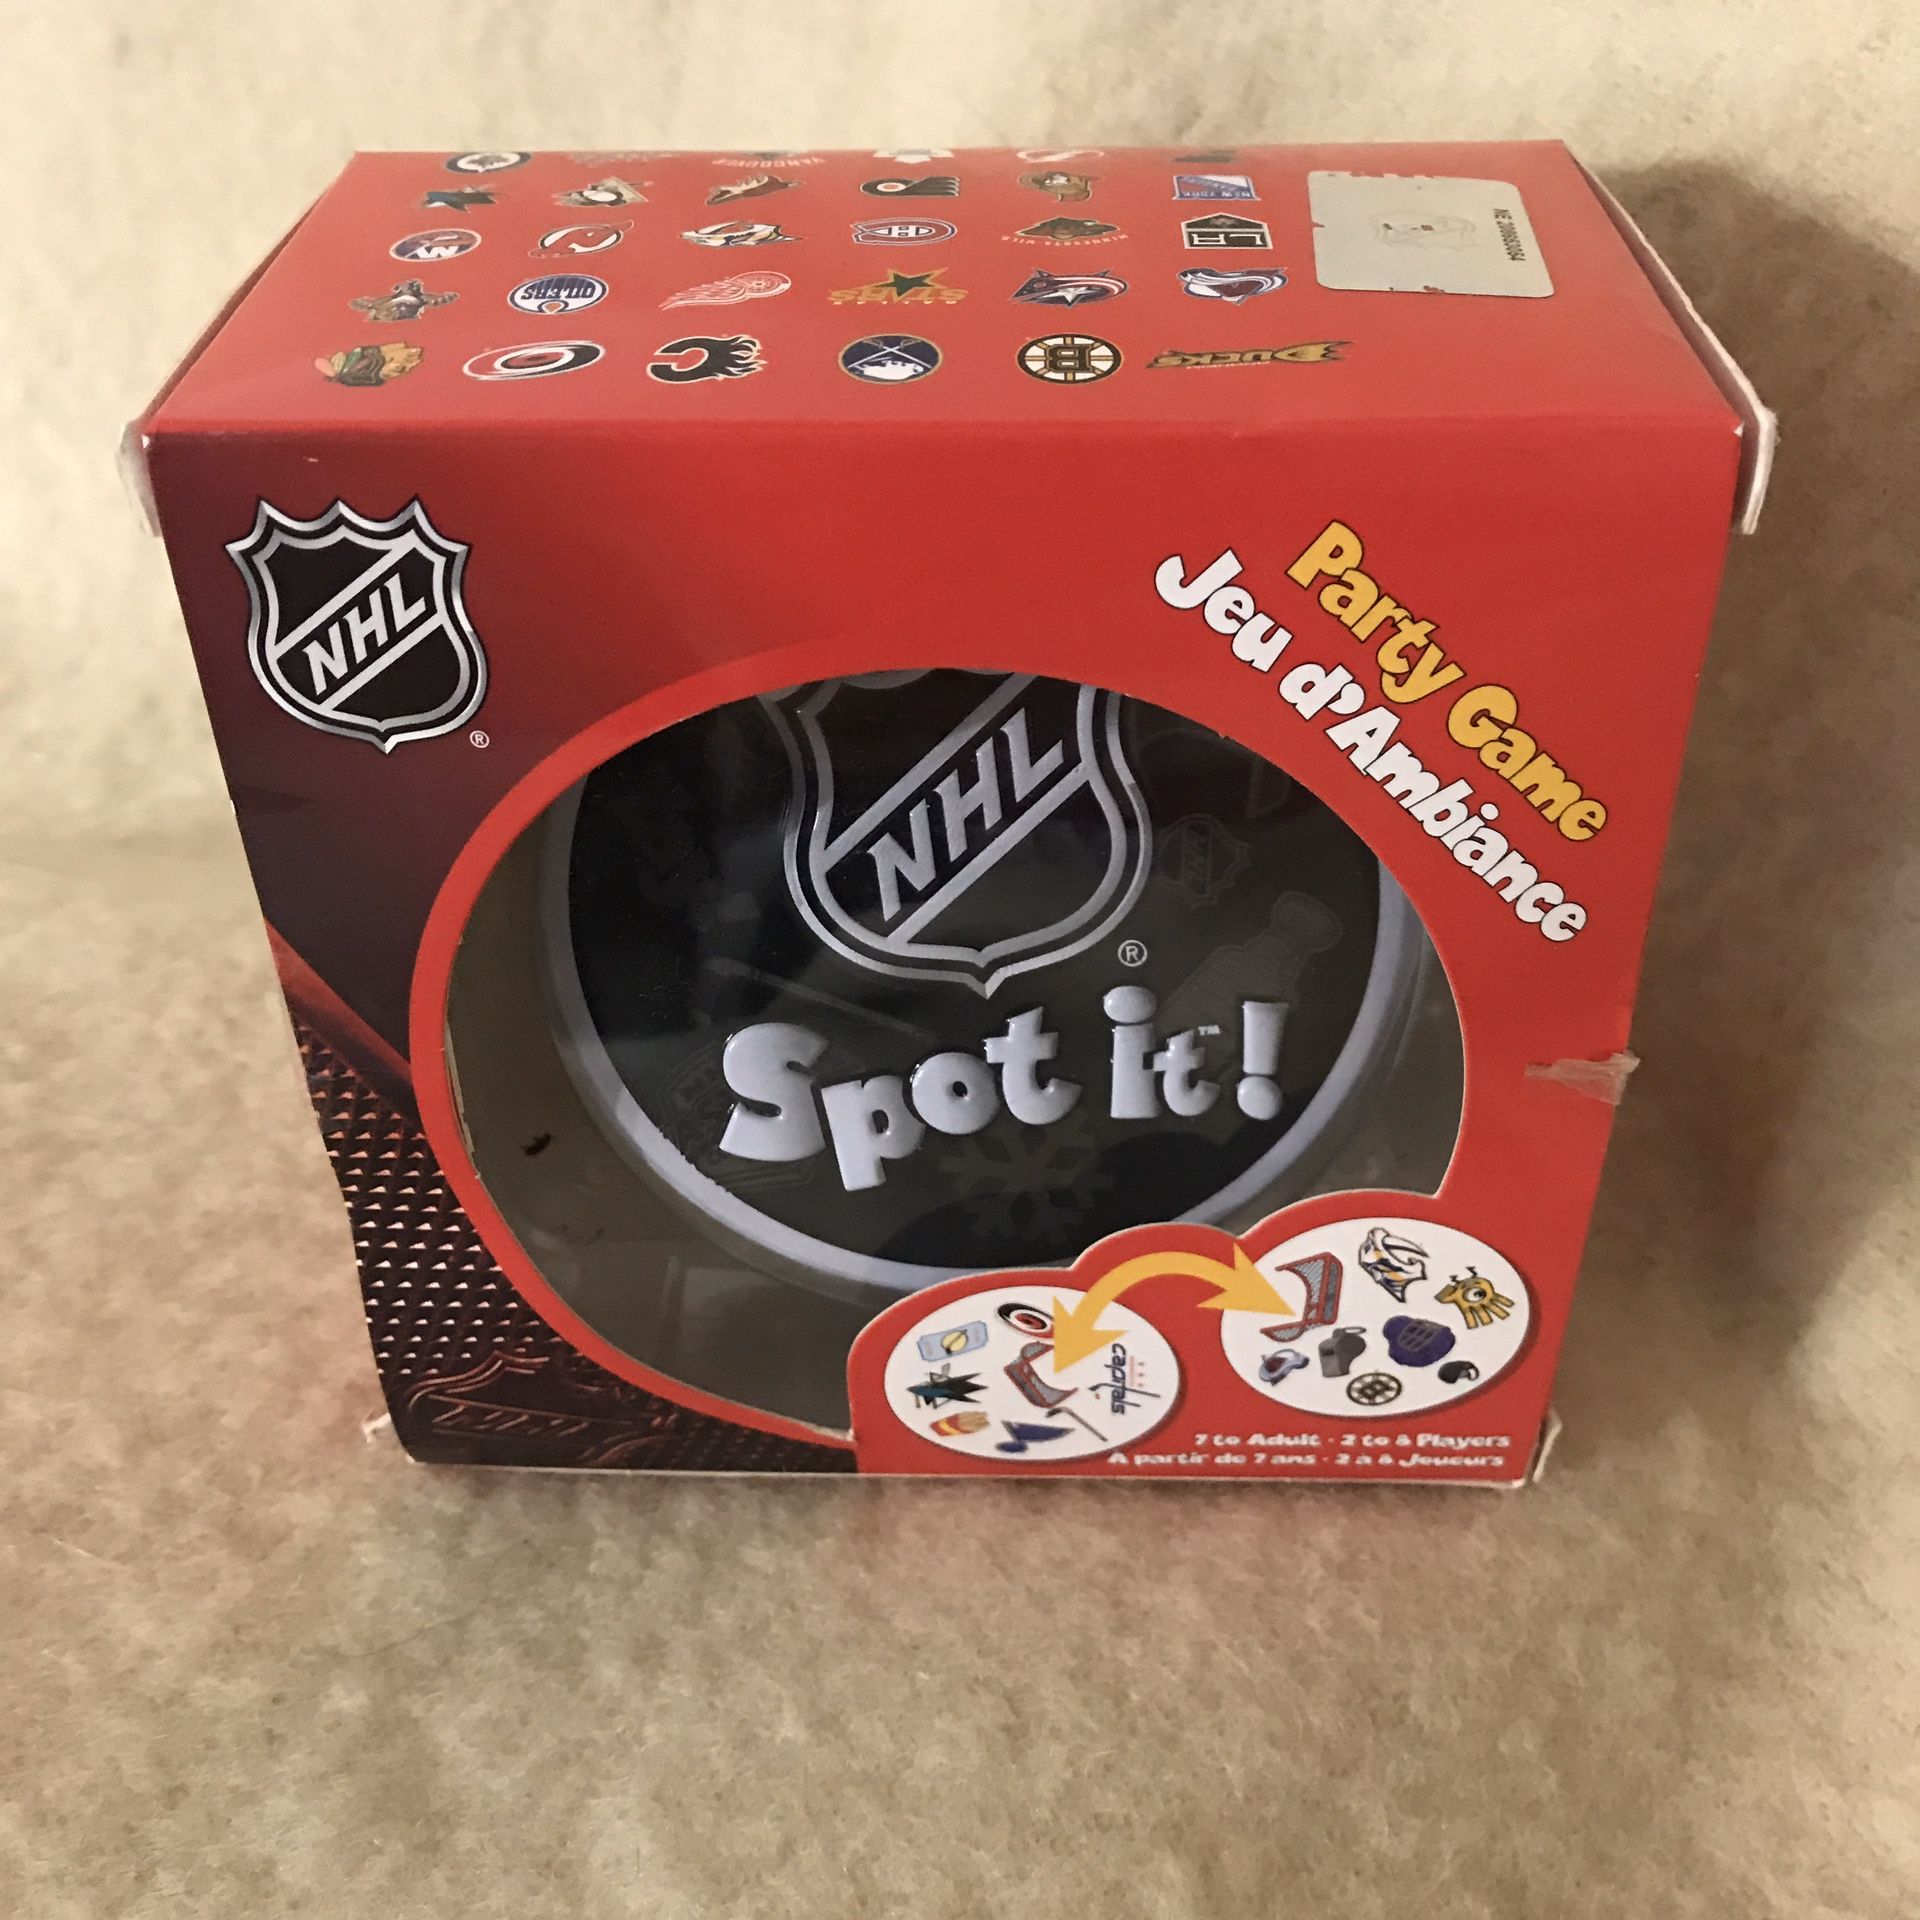 Spot It Card Game NHL Edition